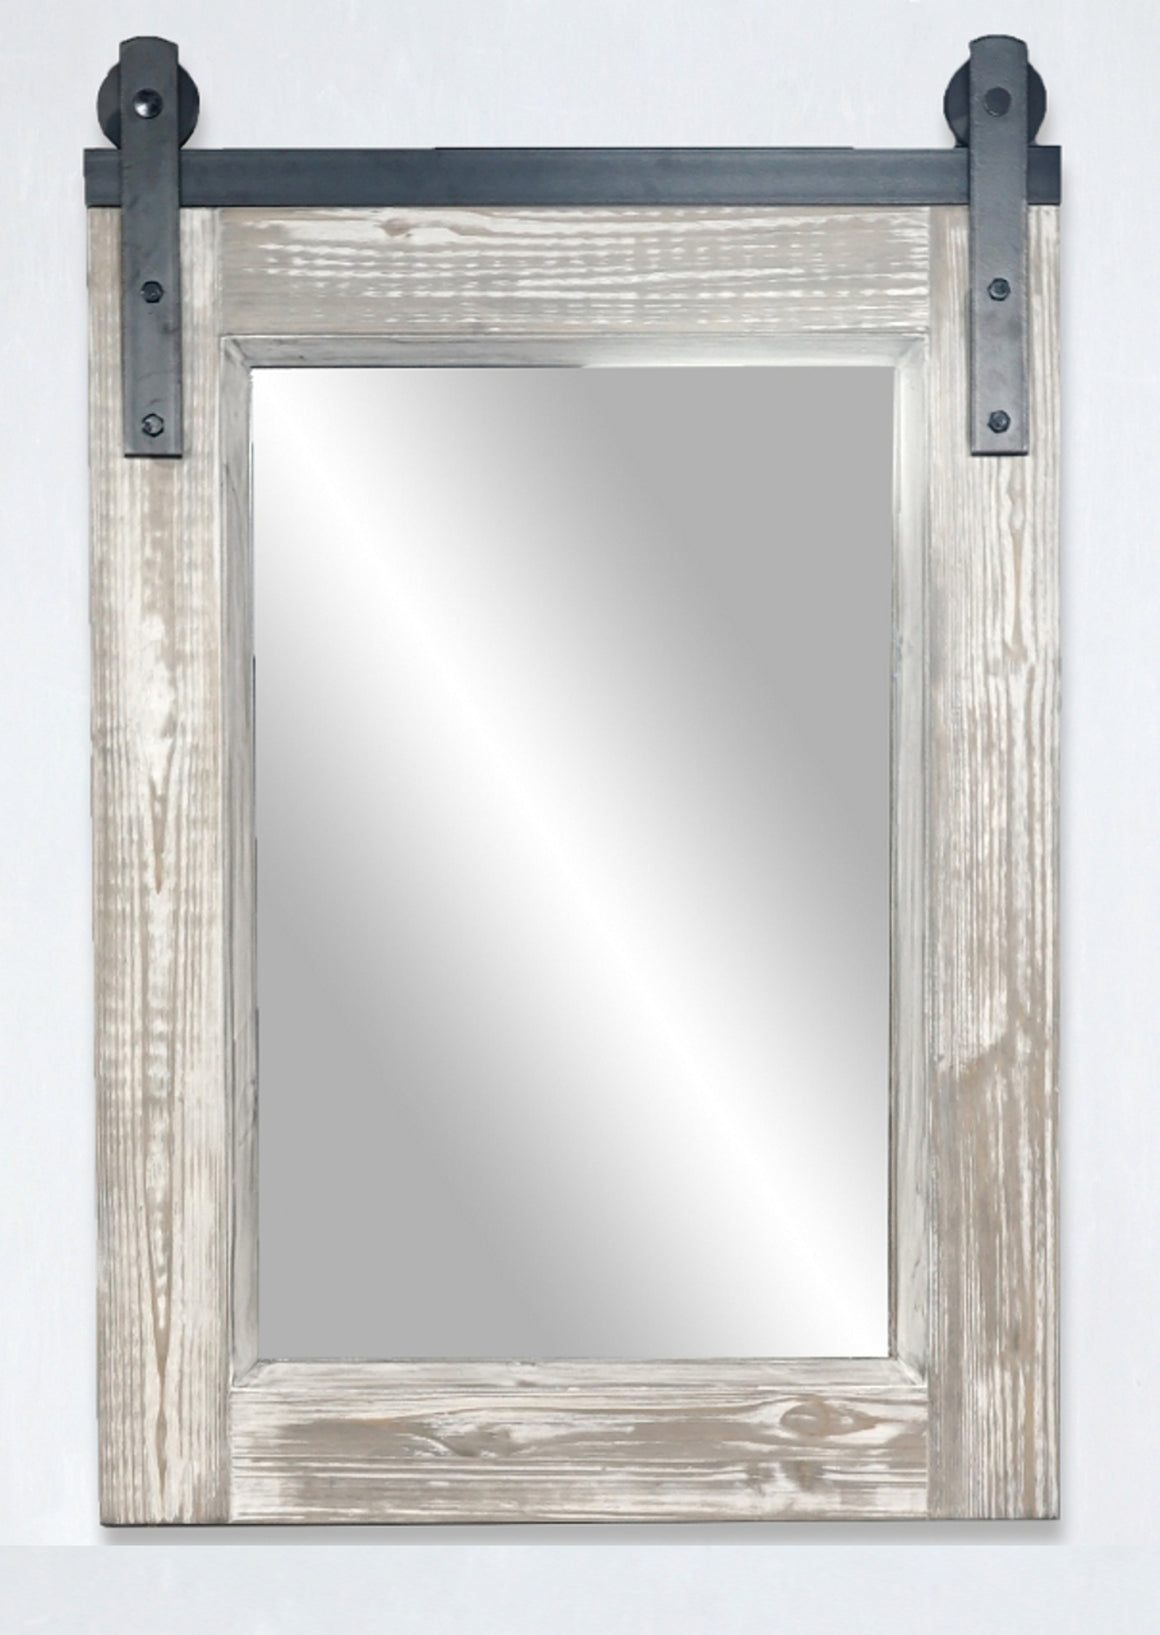 26"RUSTIC SOLID FUR BARN DOOR STYLE MIRROR IN WHITE WASH(26.6" W x 39" H)